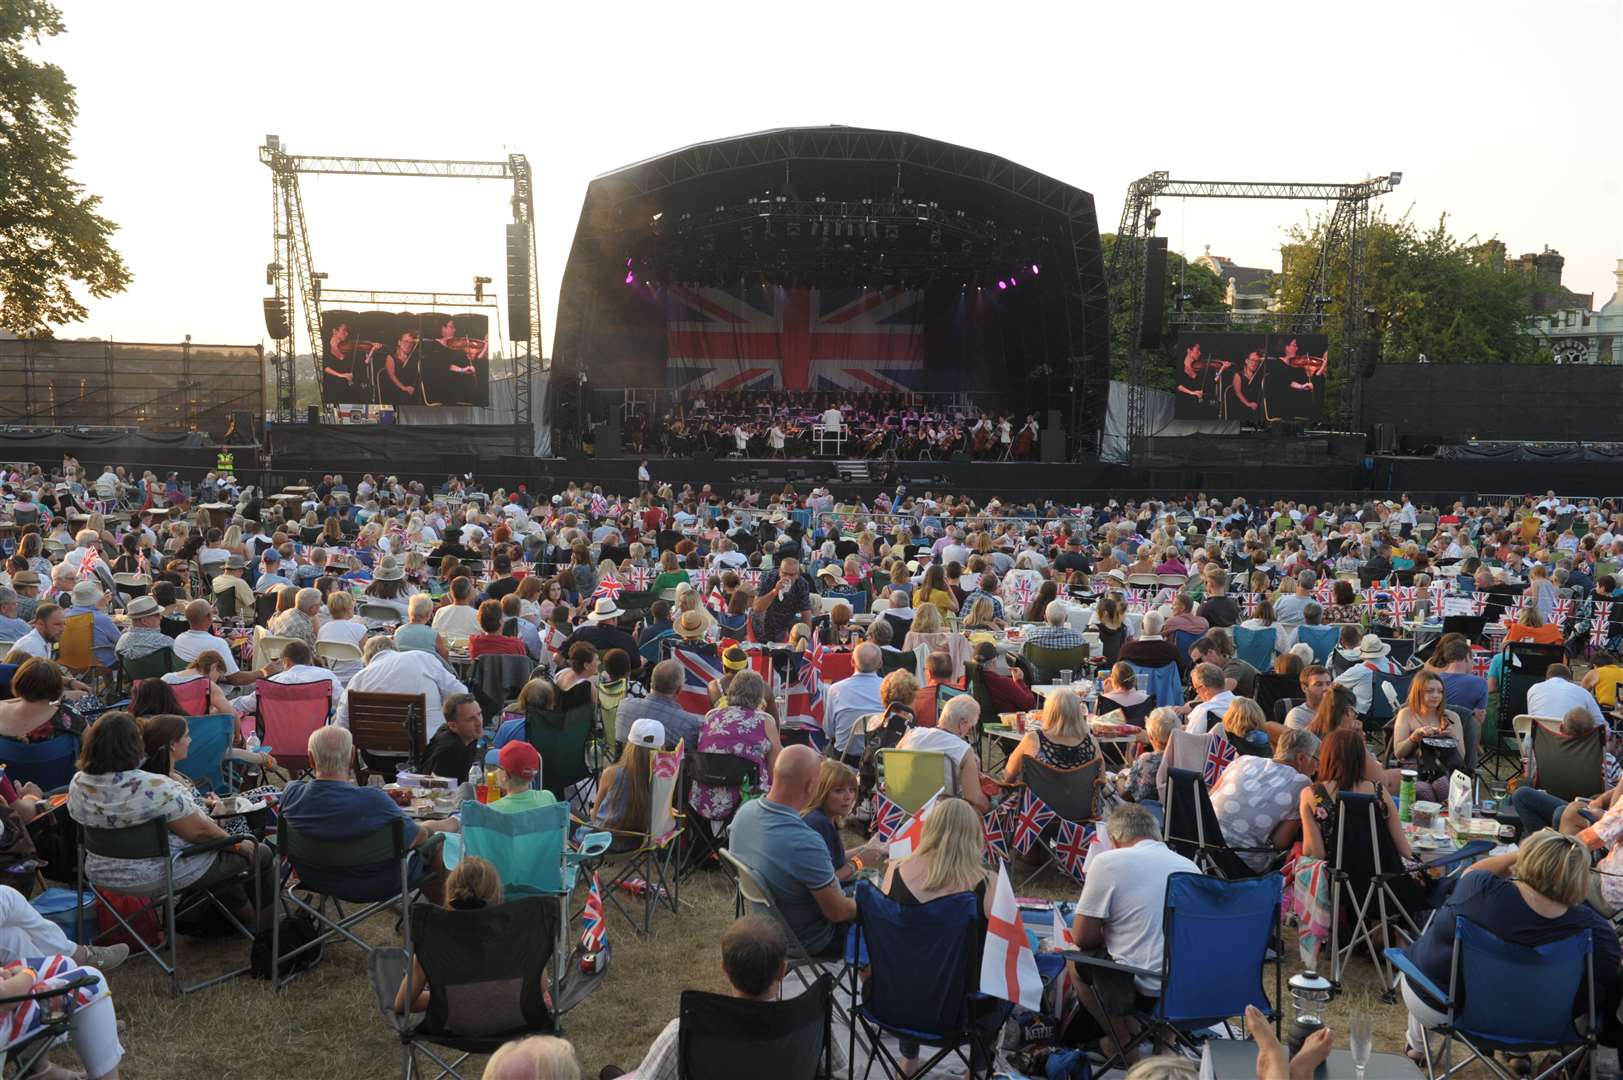 The Castle Proms event rounds traditionally rounds off the concerts programme at Rochester Castle - but will it be back this year?